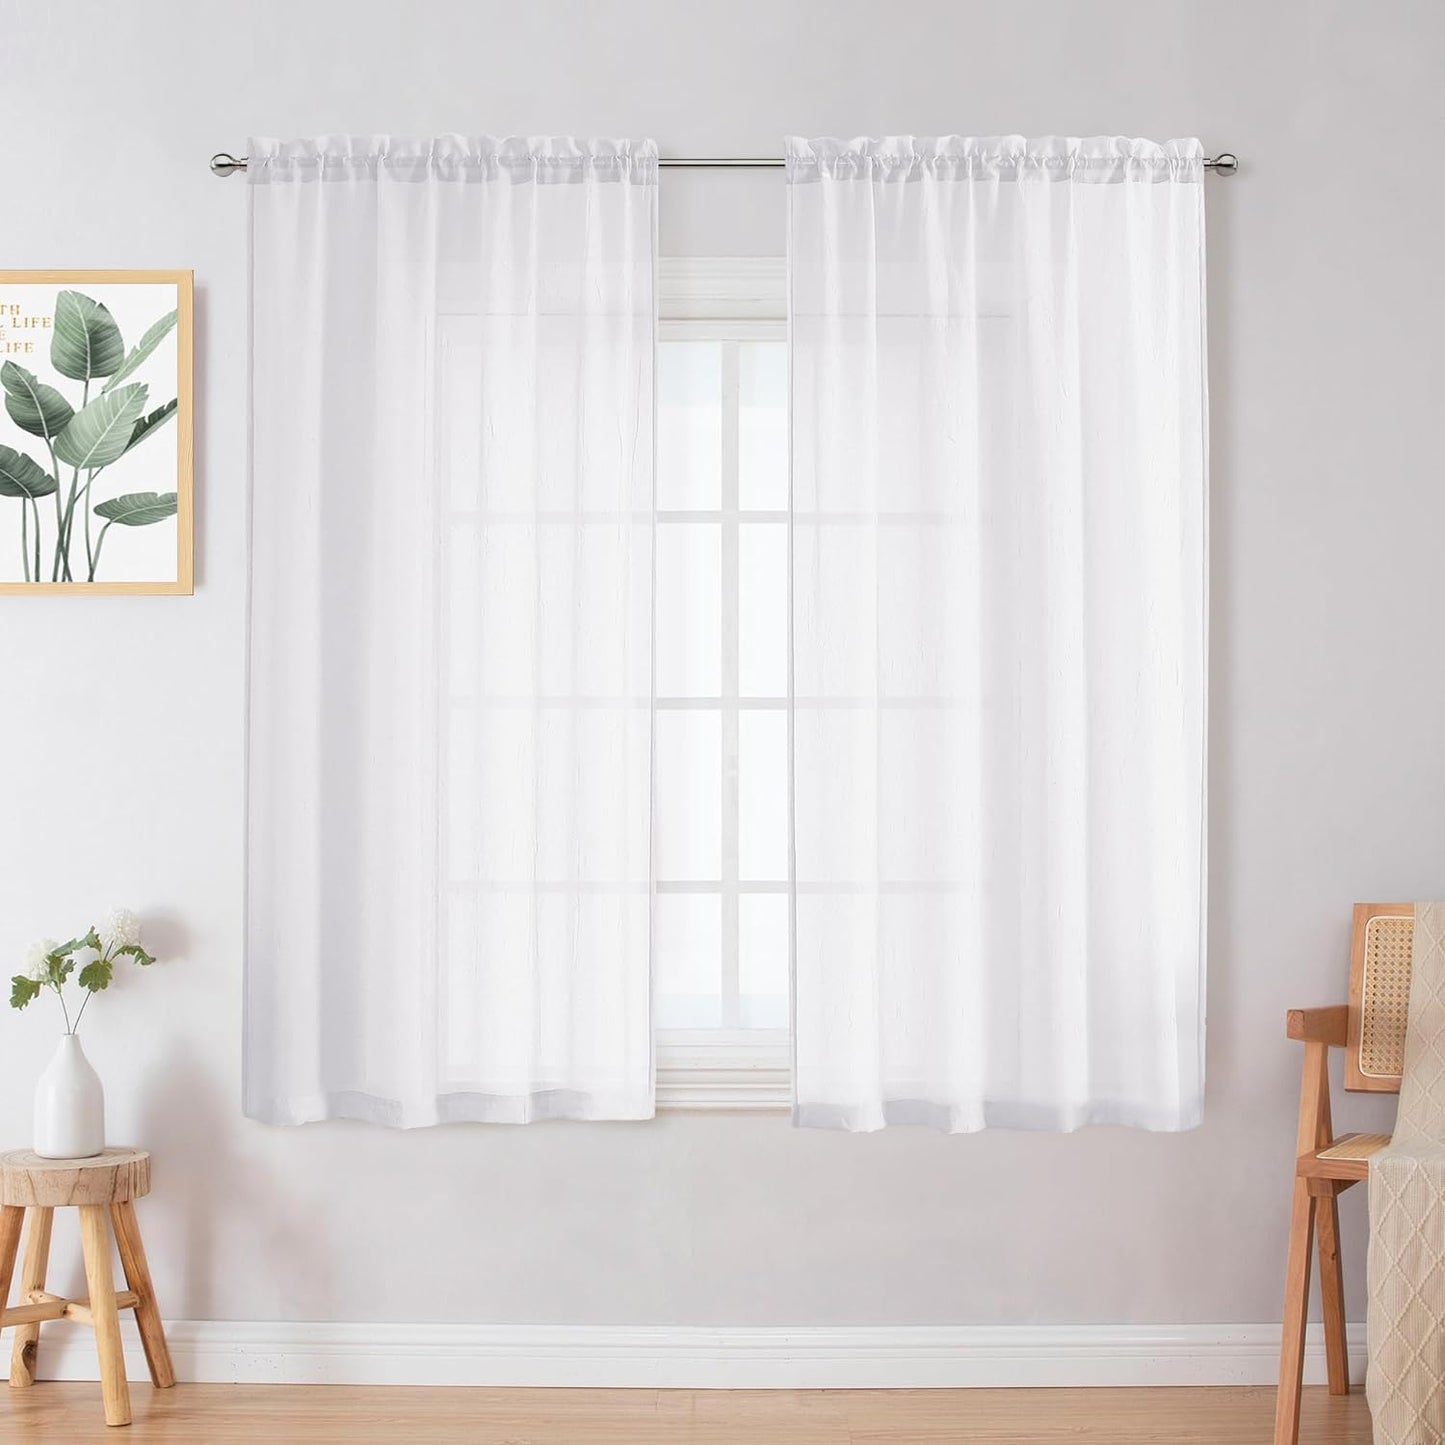 Chyhomenyc Crushed White Sheer Valances for Window 14 Inch Length 2 PCS, Crinkle Voile Short Kitchen Curtains with Dual Rod Pockets，Gauzy Bedroom Curtain Valance，Each 42Wx14L Inches  Chyhomenyc White 28 W X 54 L 